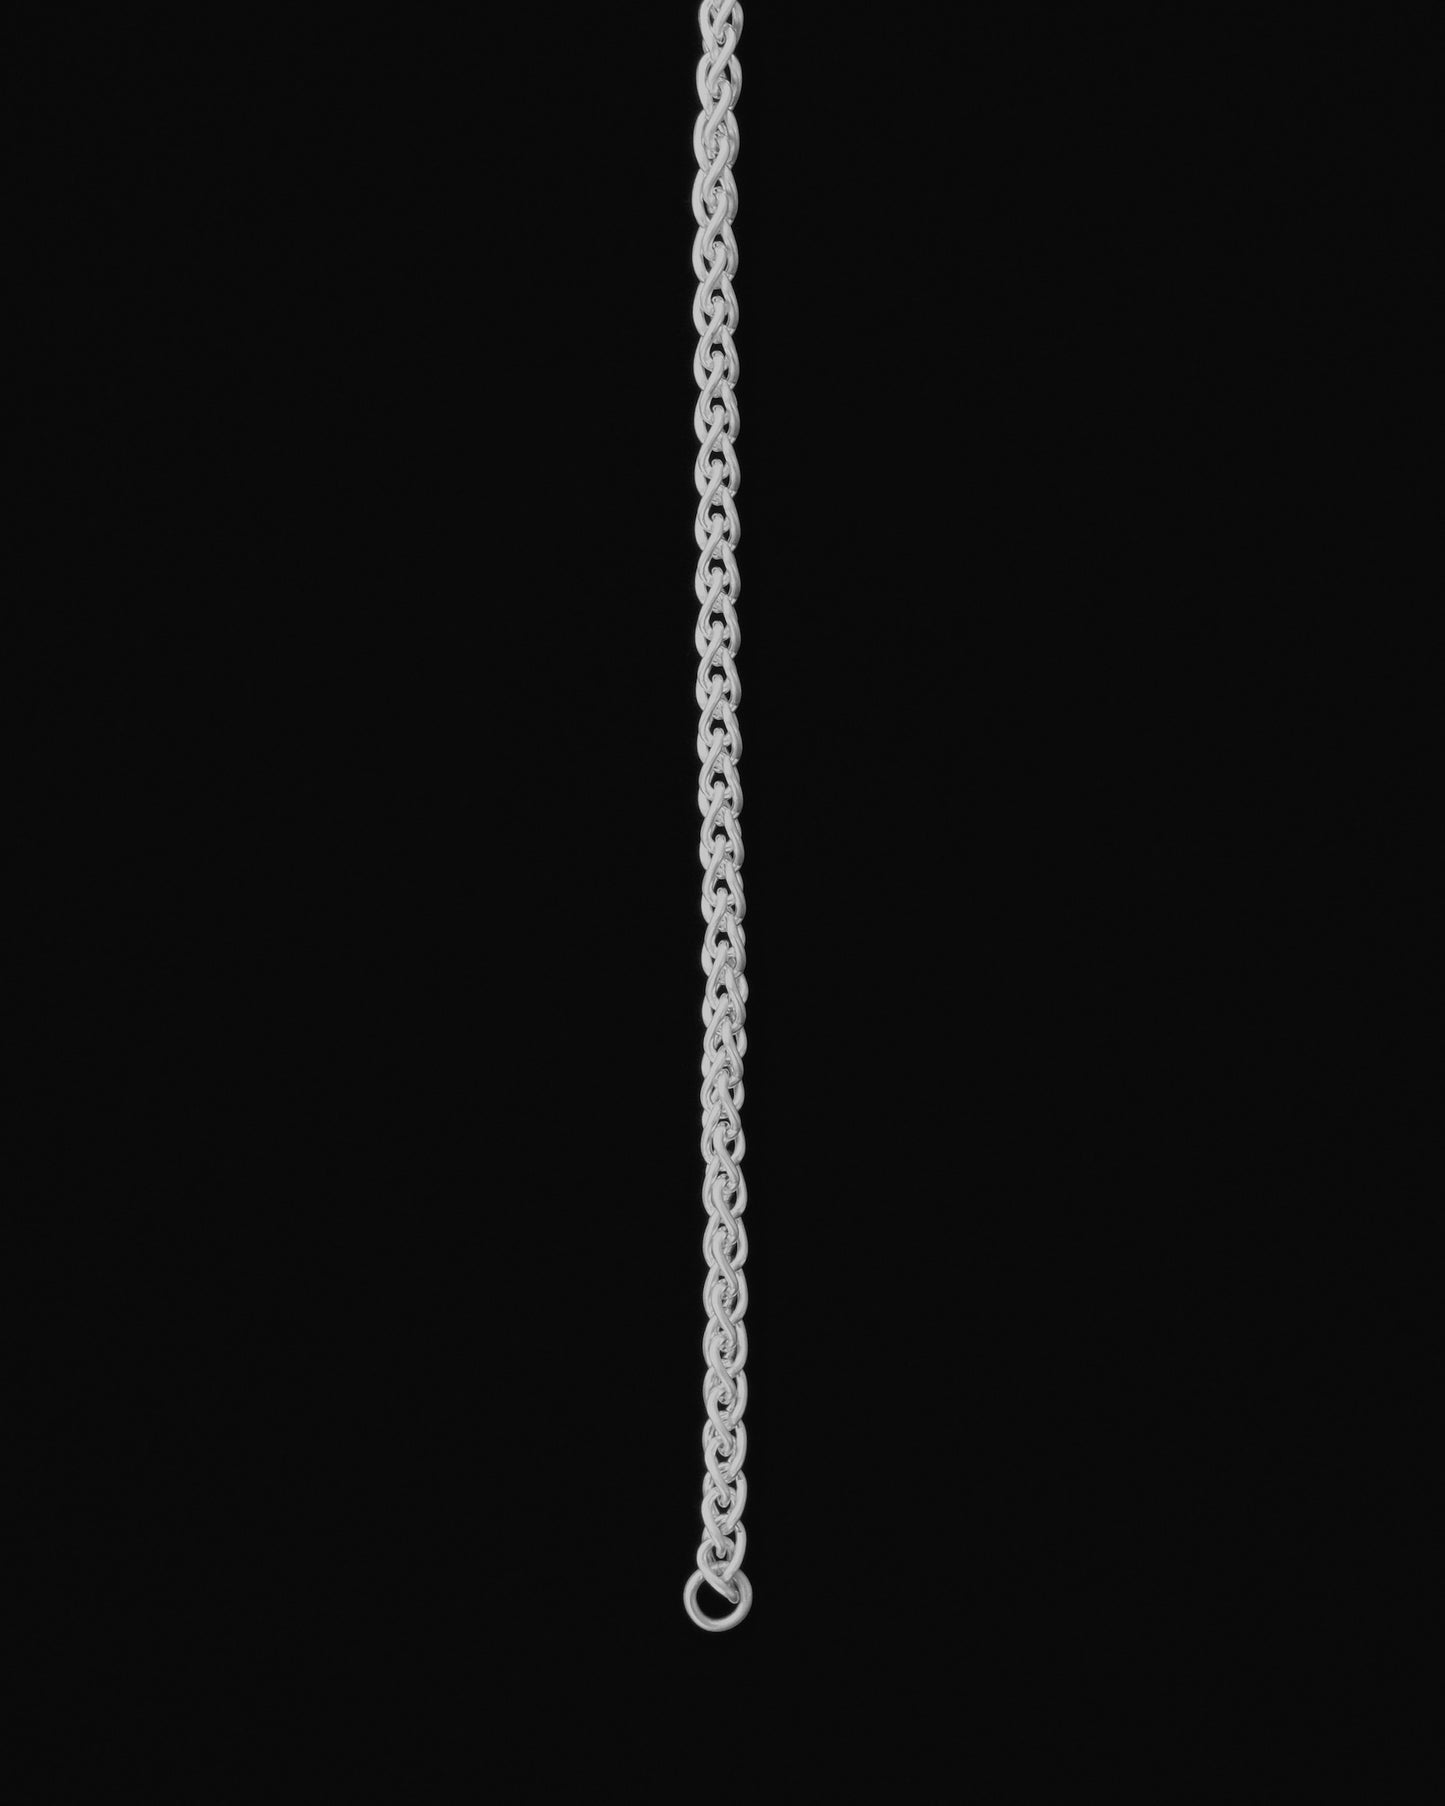 Tiana Marie Combes Riding Chain Bracelet in Sterling Silver.